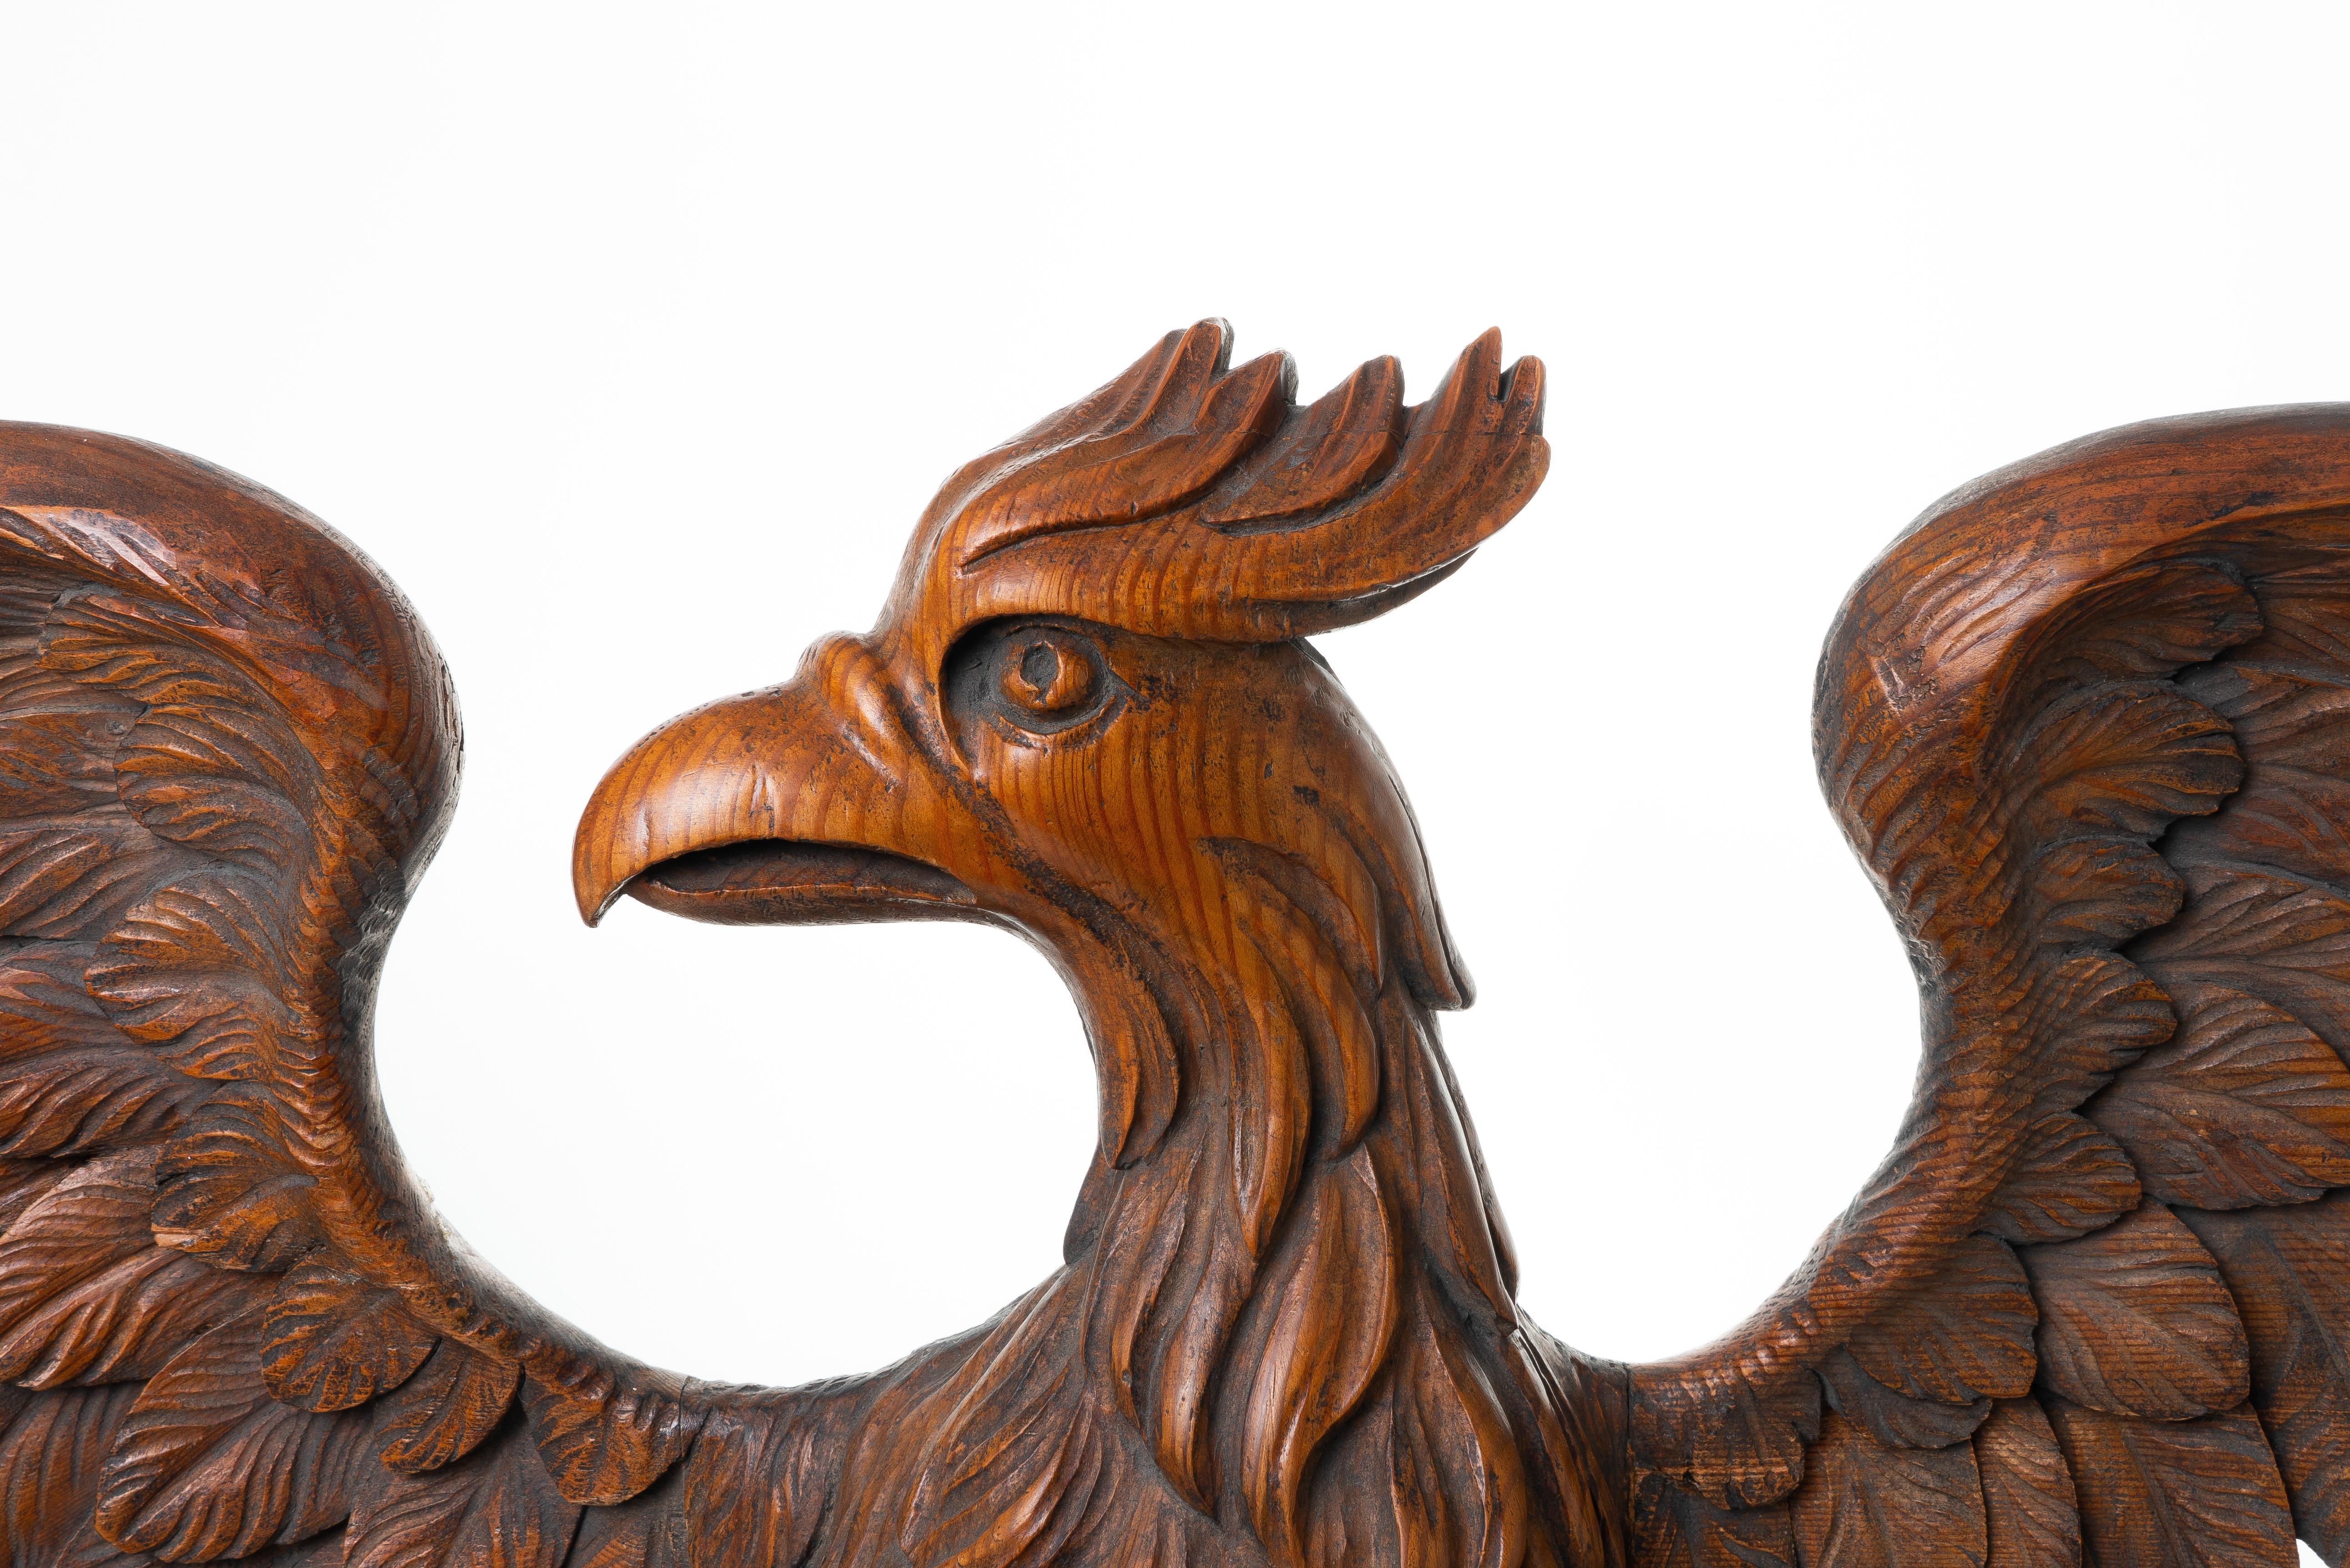 Carved wooden eagle with wings spread, standing on a rocky ledge. An architectural embellishment, the work is carved in Scotch pine with traces of the original paint on the rocky base. The carving is fitted to a custom wall mount bracket.

Northern